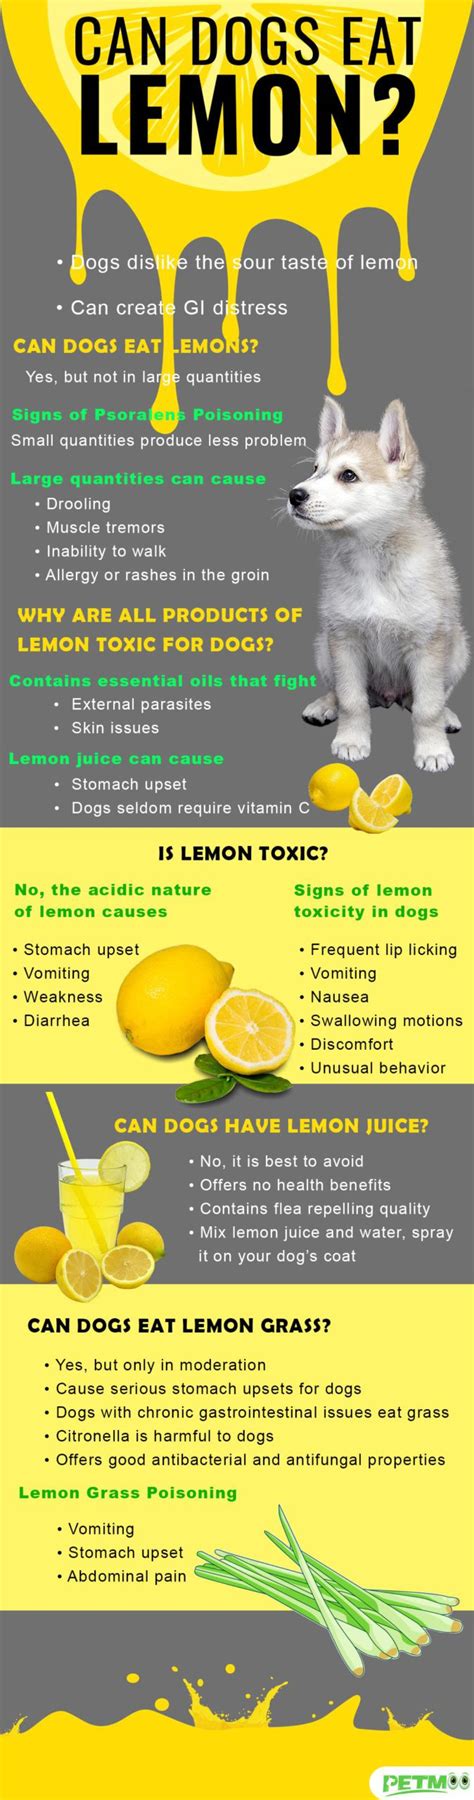 Dog ate lemon seed. Lemon Poppy Seed Muffin Ingredients. Before determining if it’s safe for our dogs to eat lemon poppy seed muffins, let’s take a look at the ingredients. Besides lemons and poppy seeds, these muffins contain flour, sugar, eggs, milk or buttermilk and oil or butter. While some of these ingredients aren’t necessarily harmful to dogs in small ... 